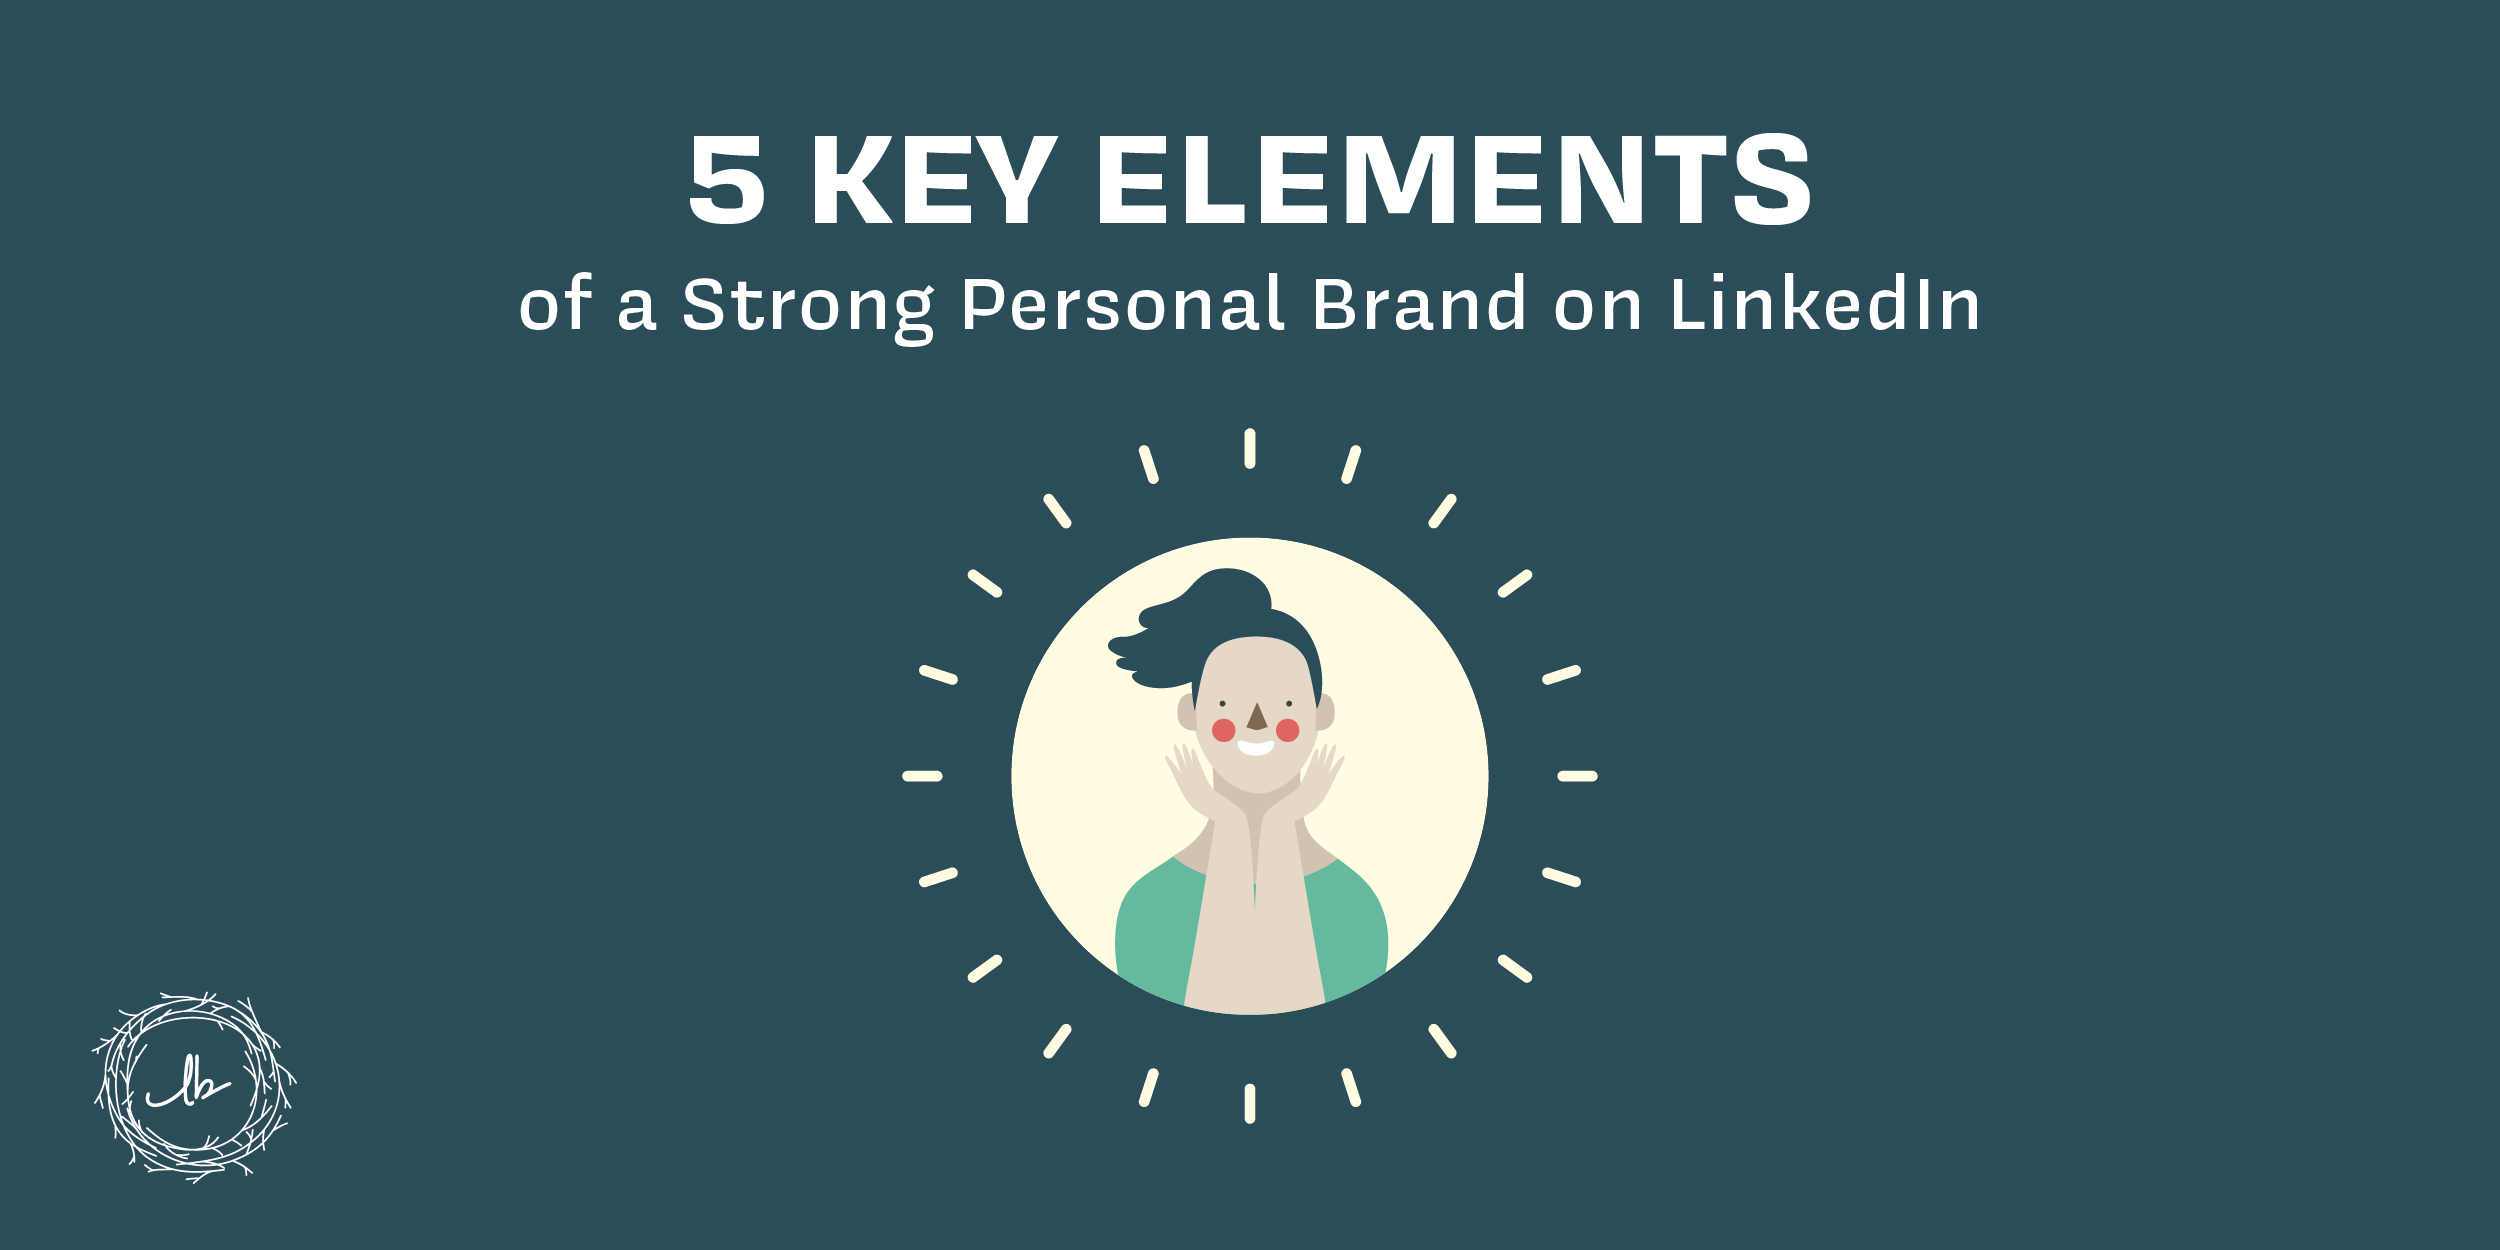 5 Key Elements of a Strong Personal Brand on LinkedIn